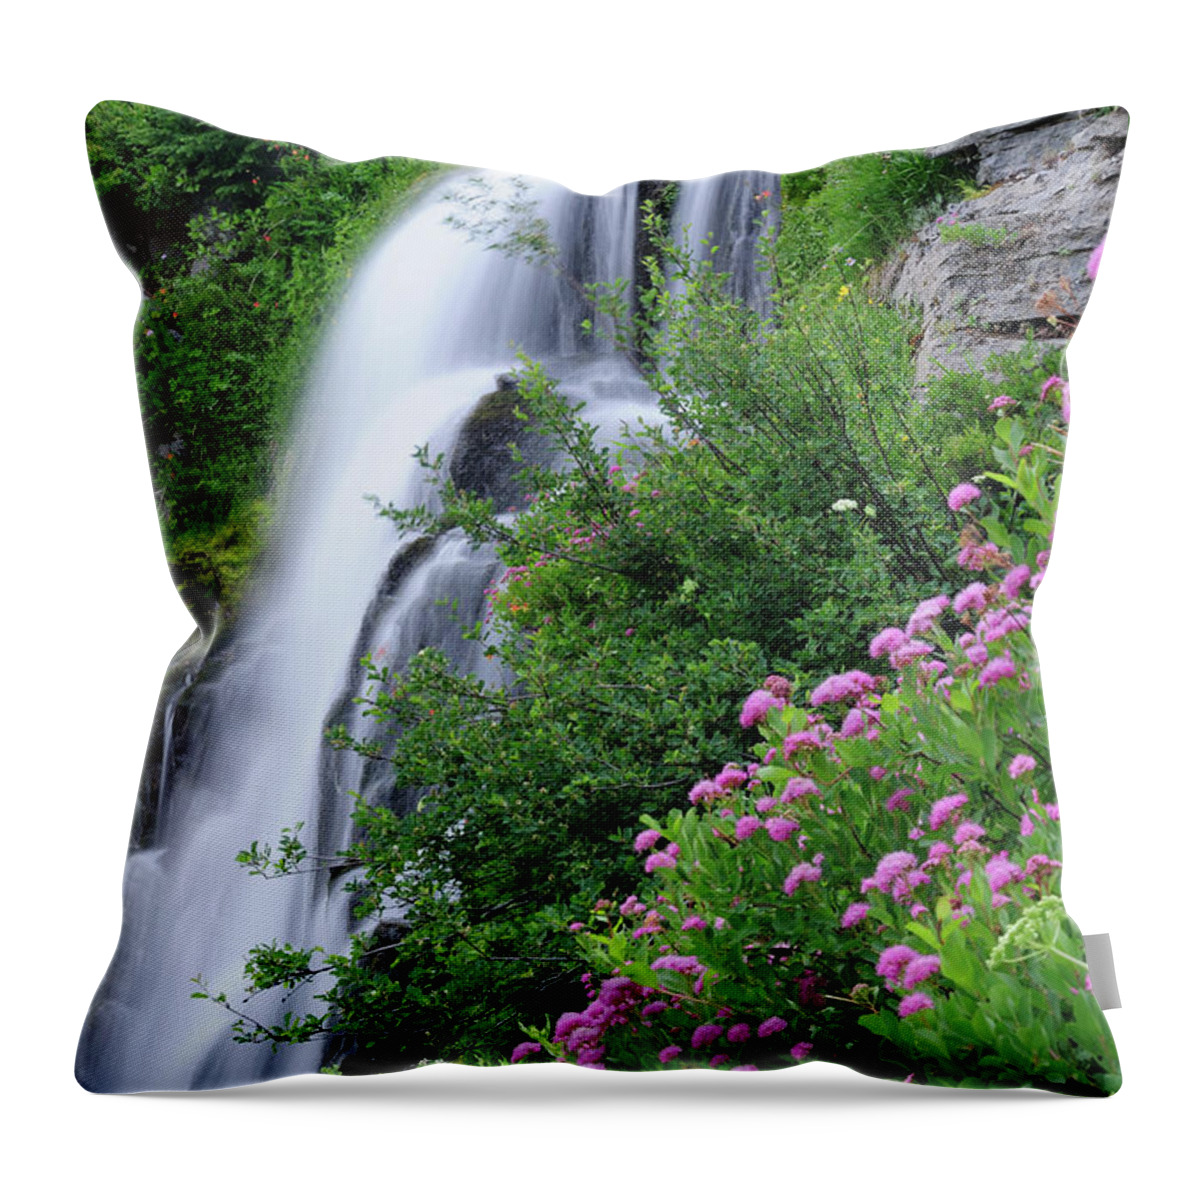 Scenics Throw Pillow featuring the photograph Idyllic Vidae Falls by Aimintang